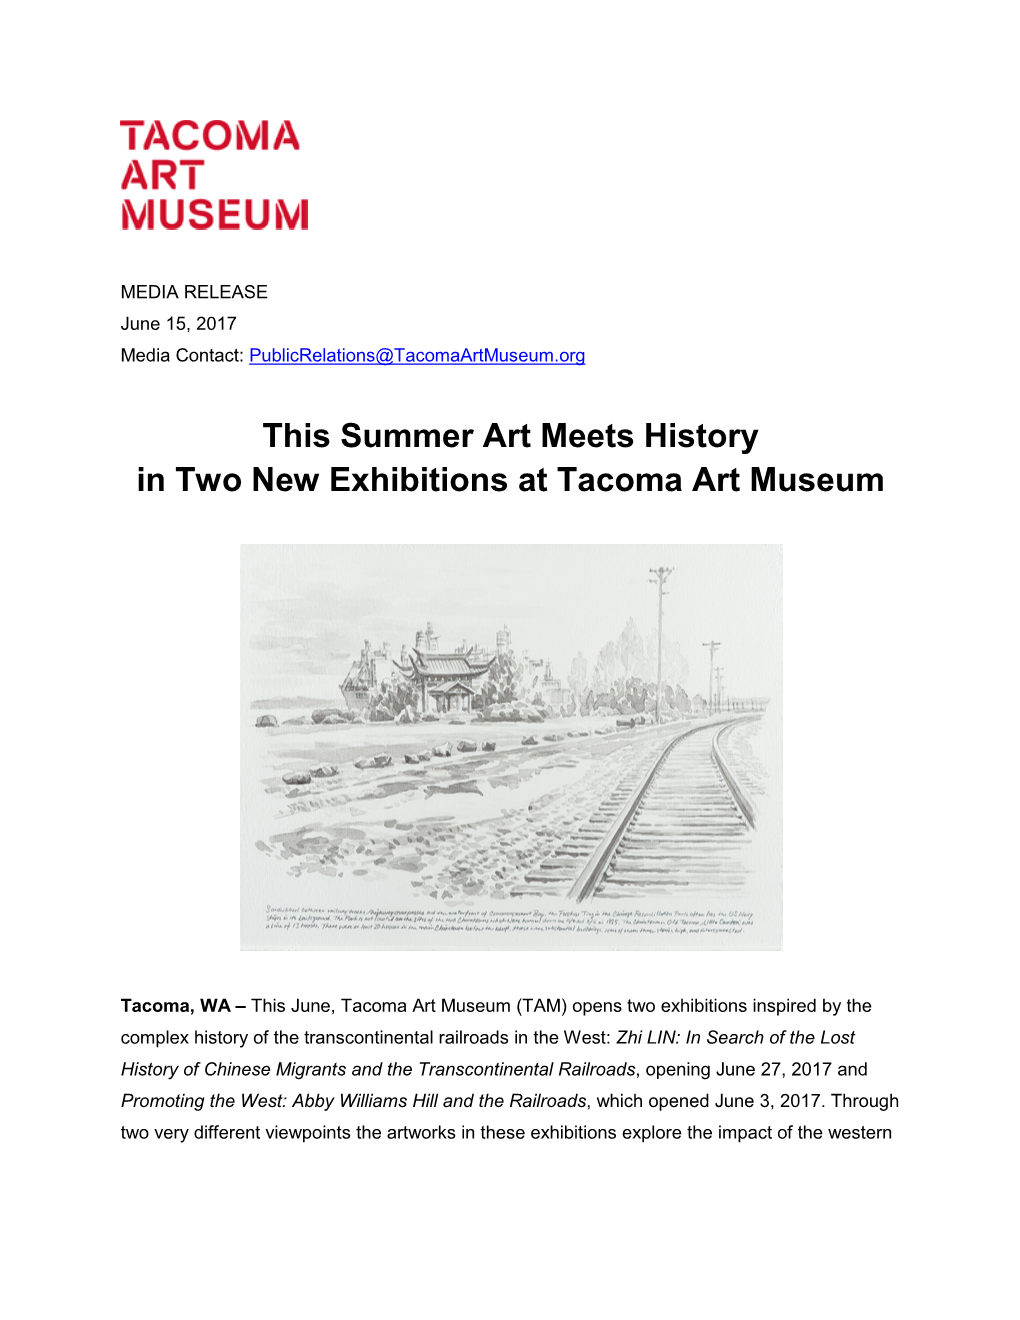 This Summer Art Meets History in Two New Exhibitions at Tacoma Art Museum